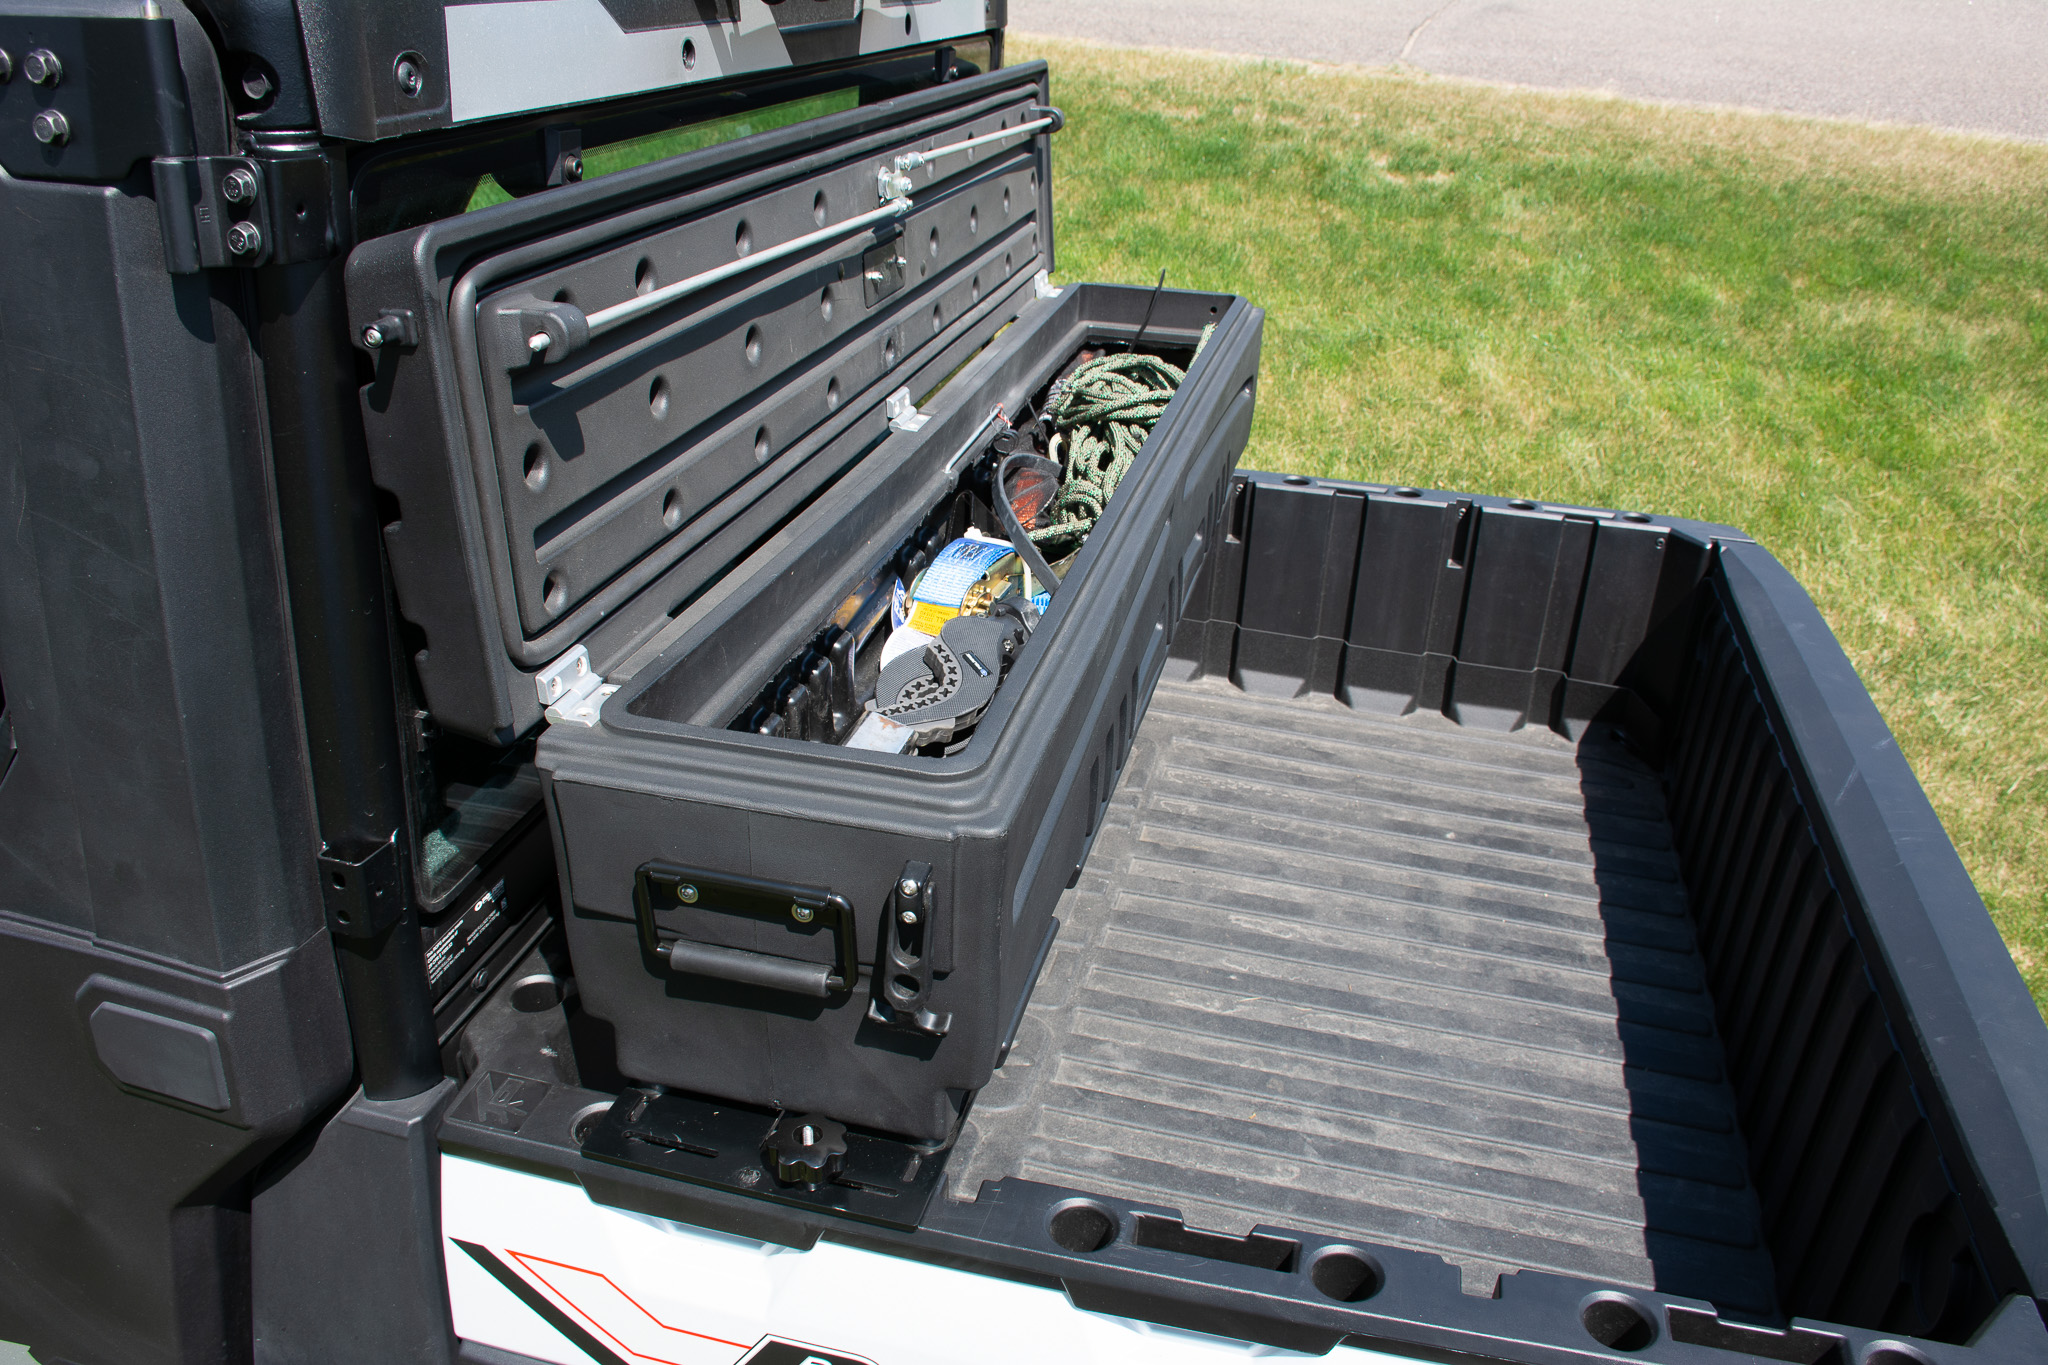 ATV storage box mounted atop ATV/UTV bed to store and protect gear, tools, and firearms.